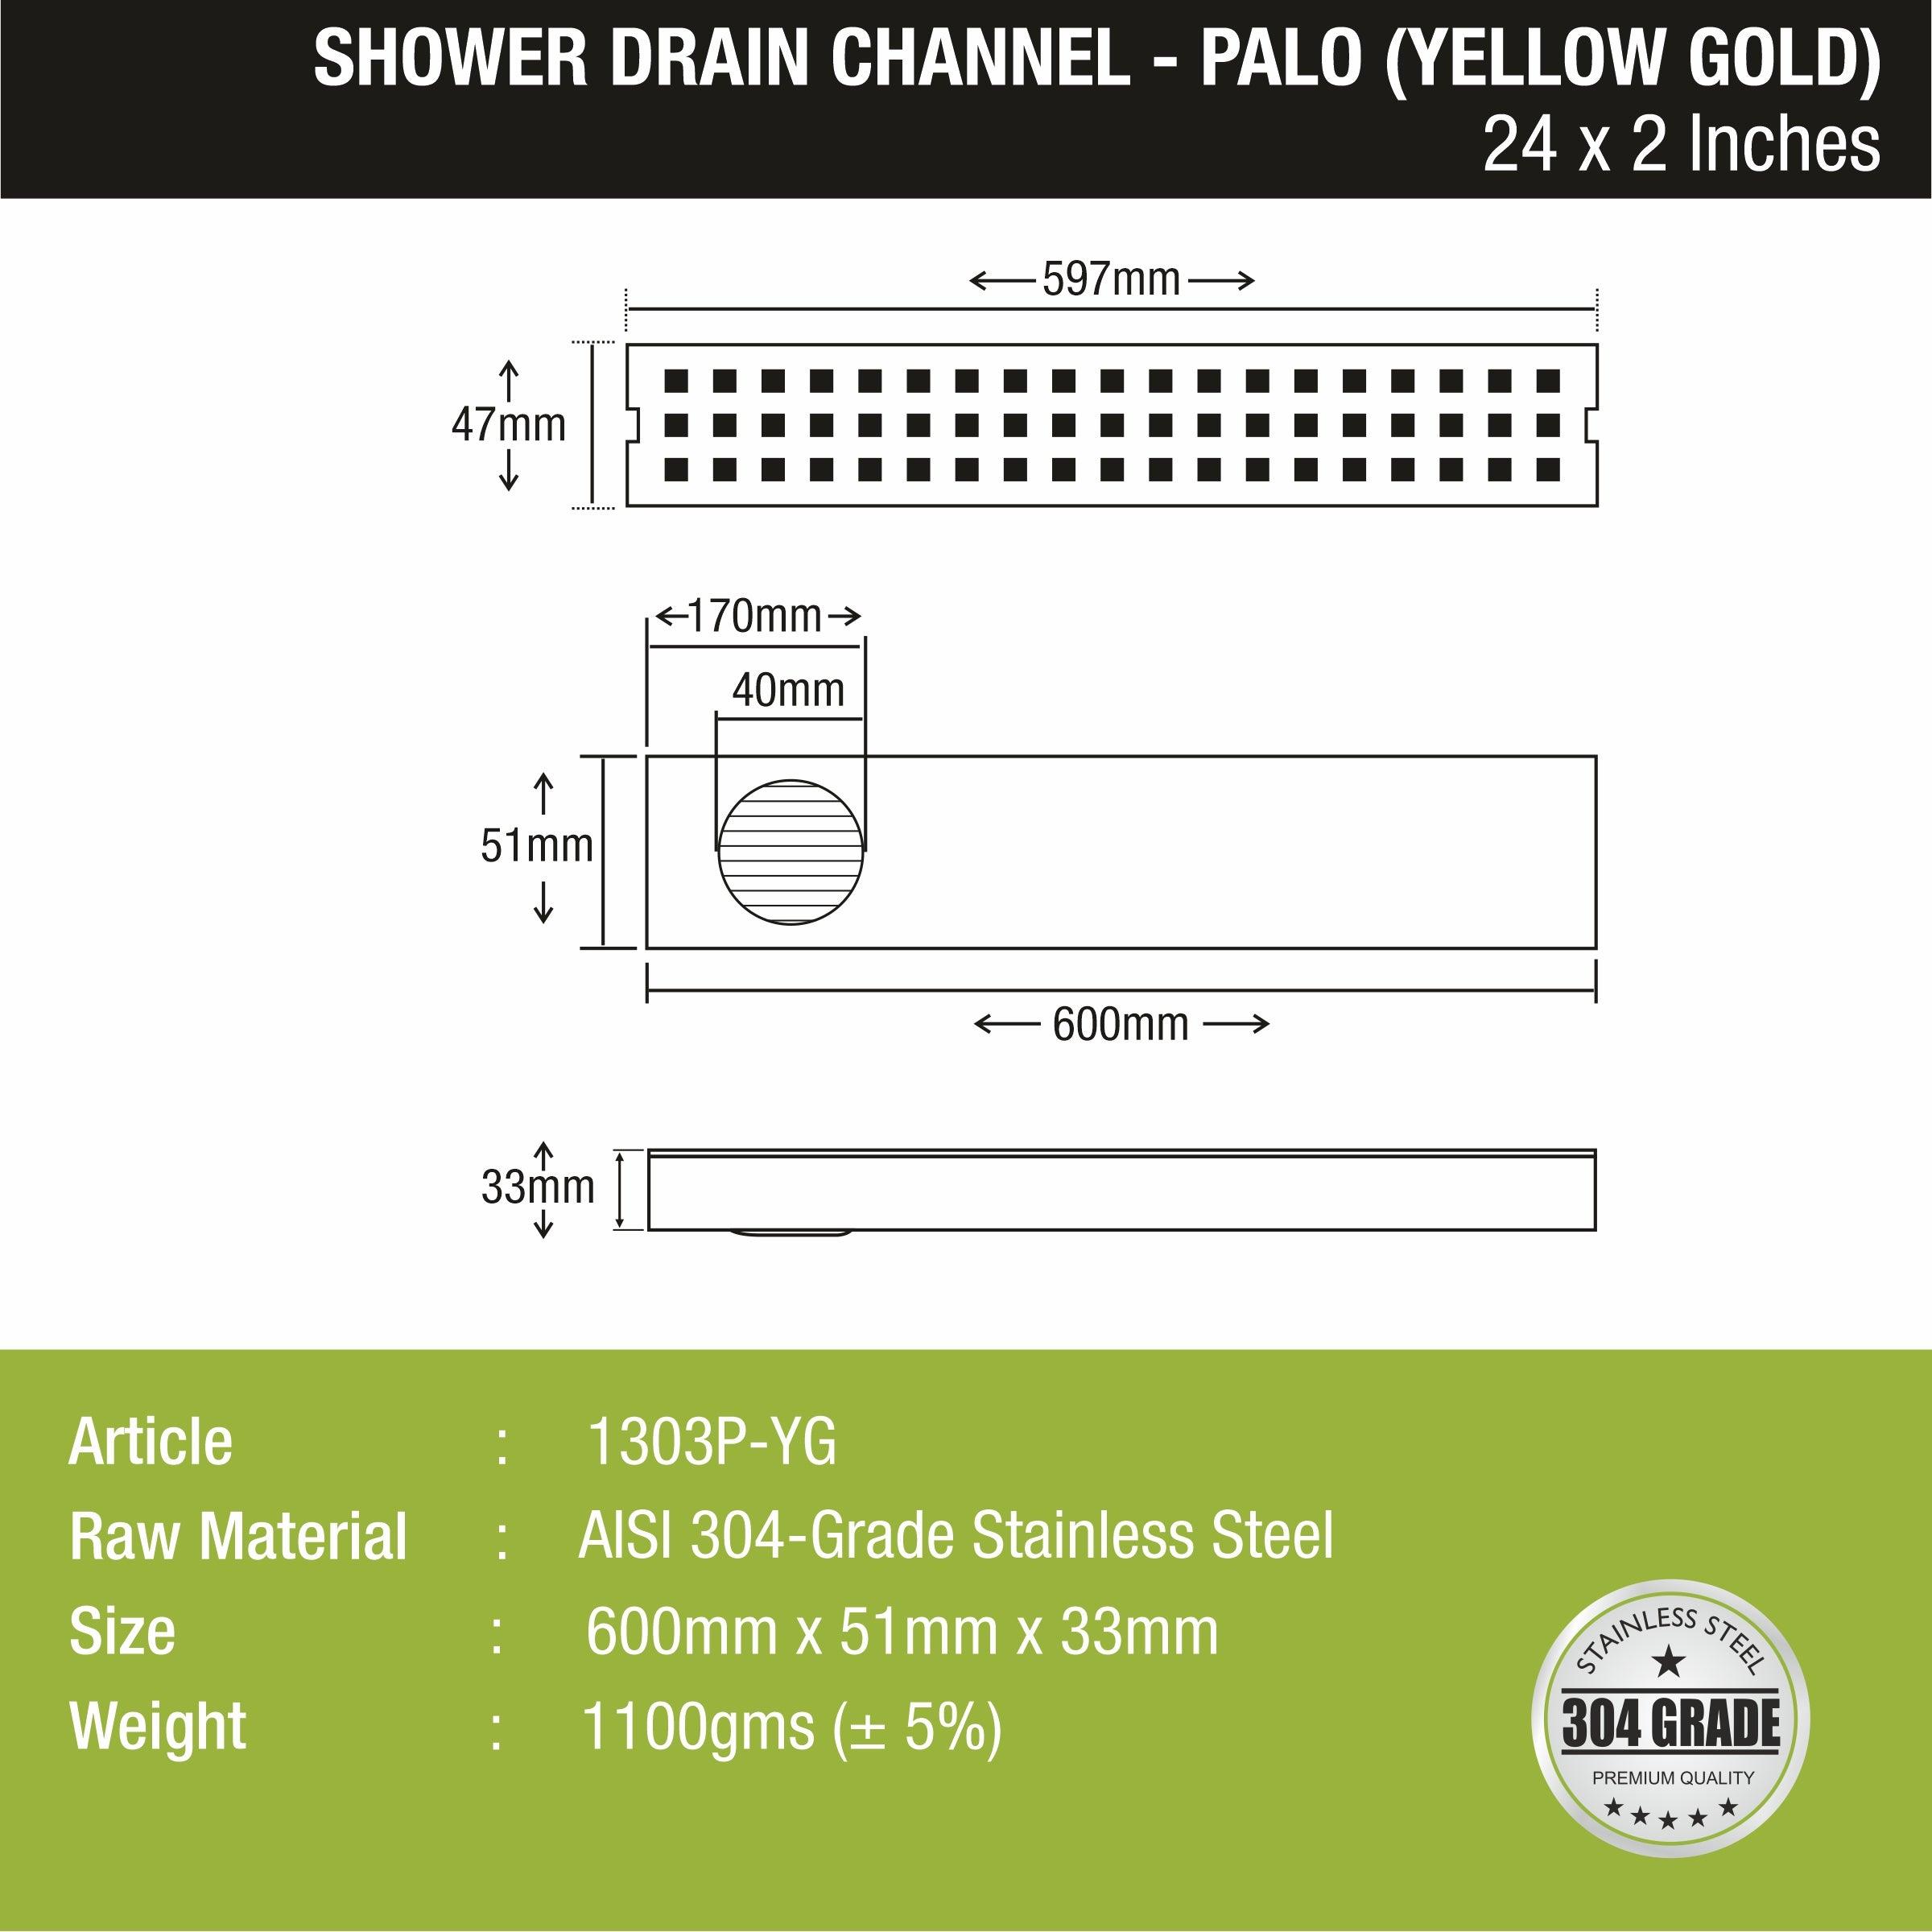 Palo Shower Drain Channel - Yellow Gold (24 x 2 Inches) sizes and dimensions